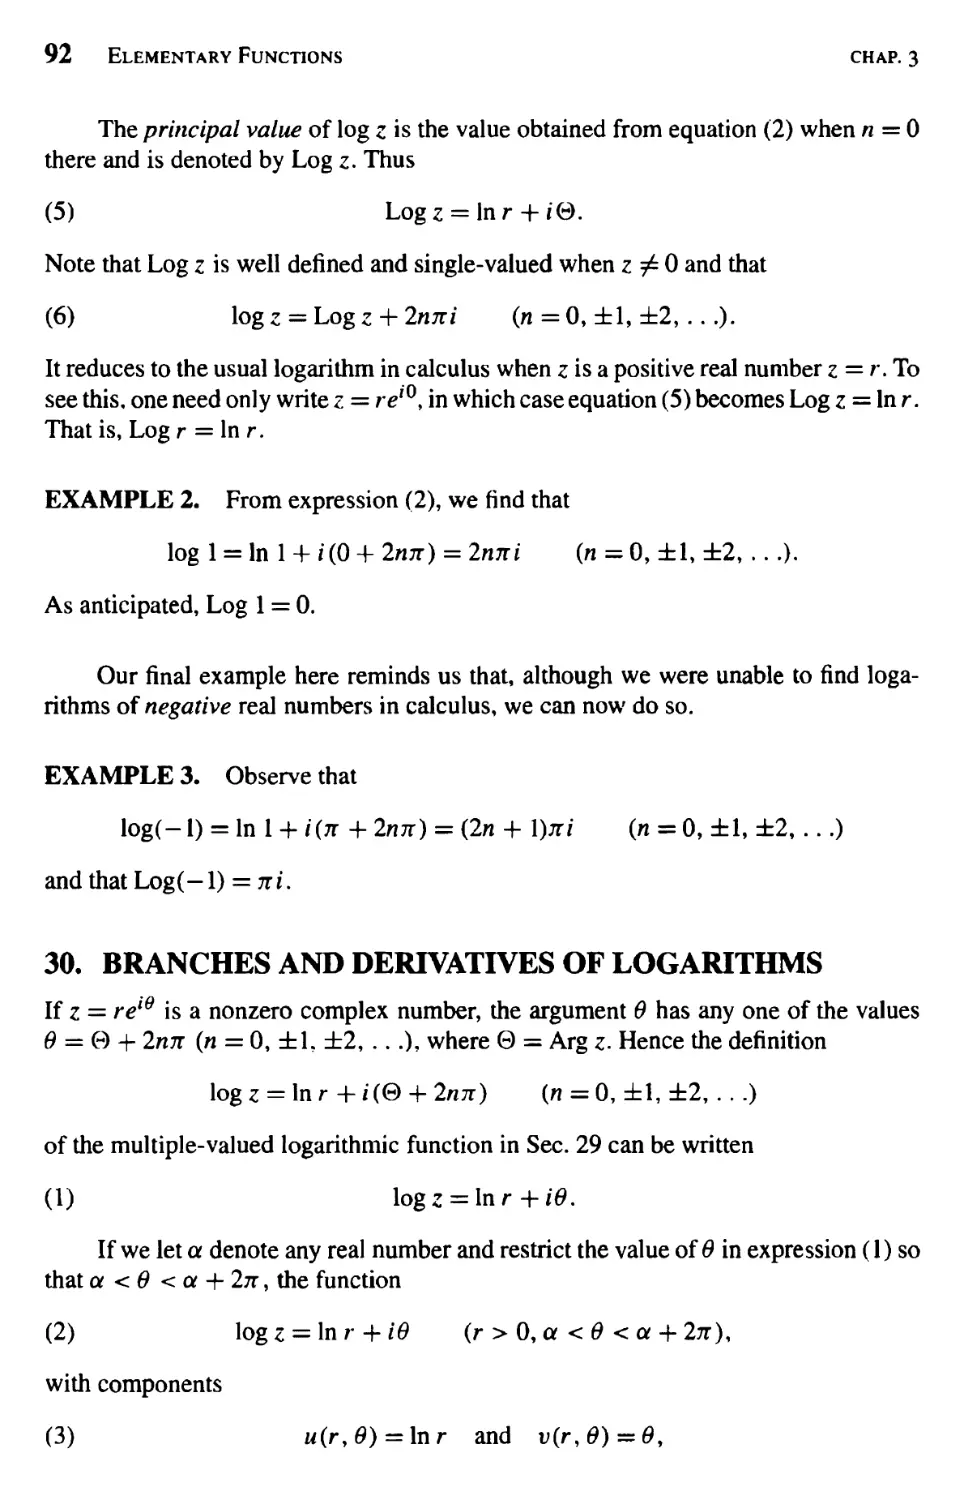 Branches and Derivatives of Logarithms